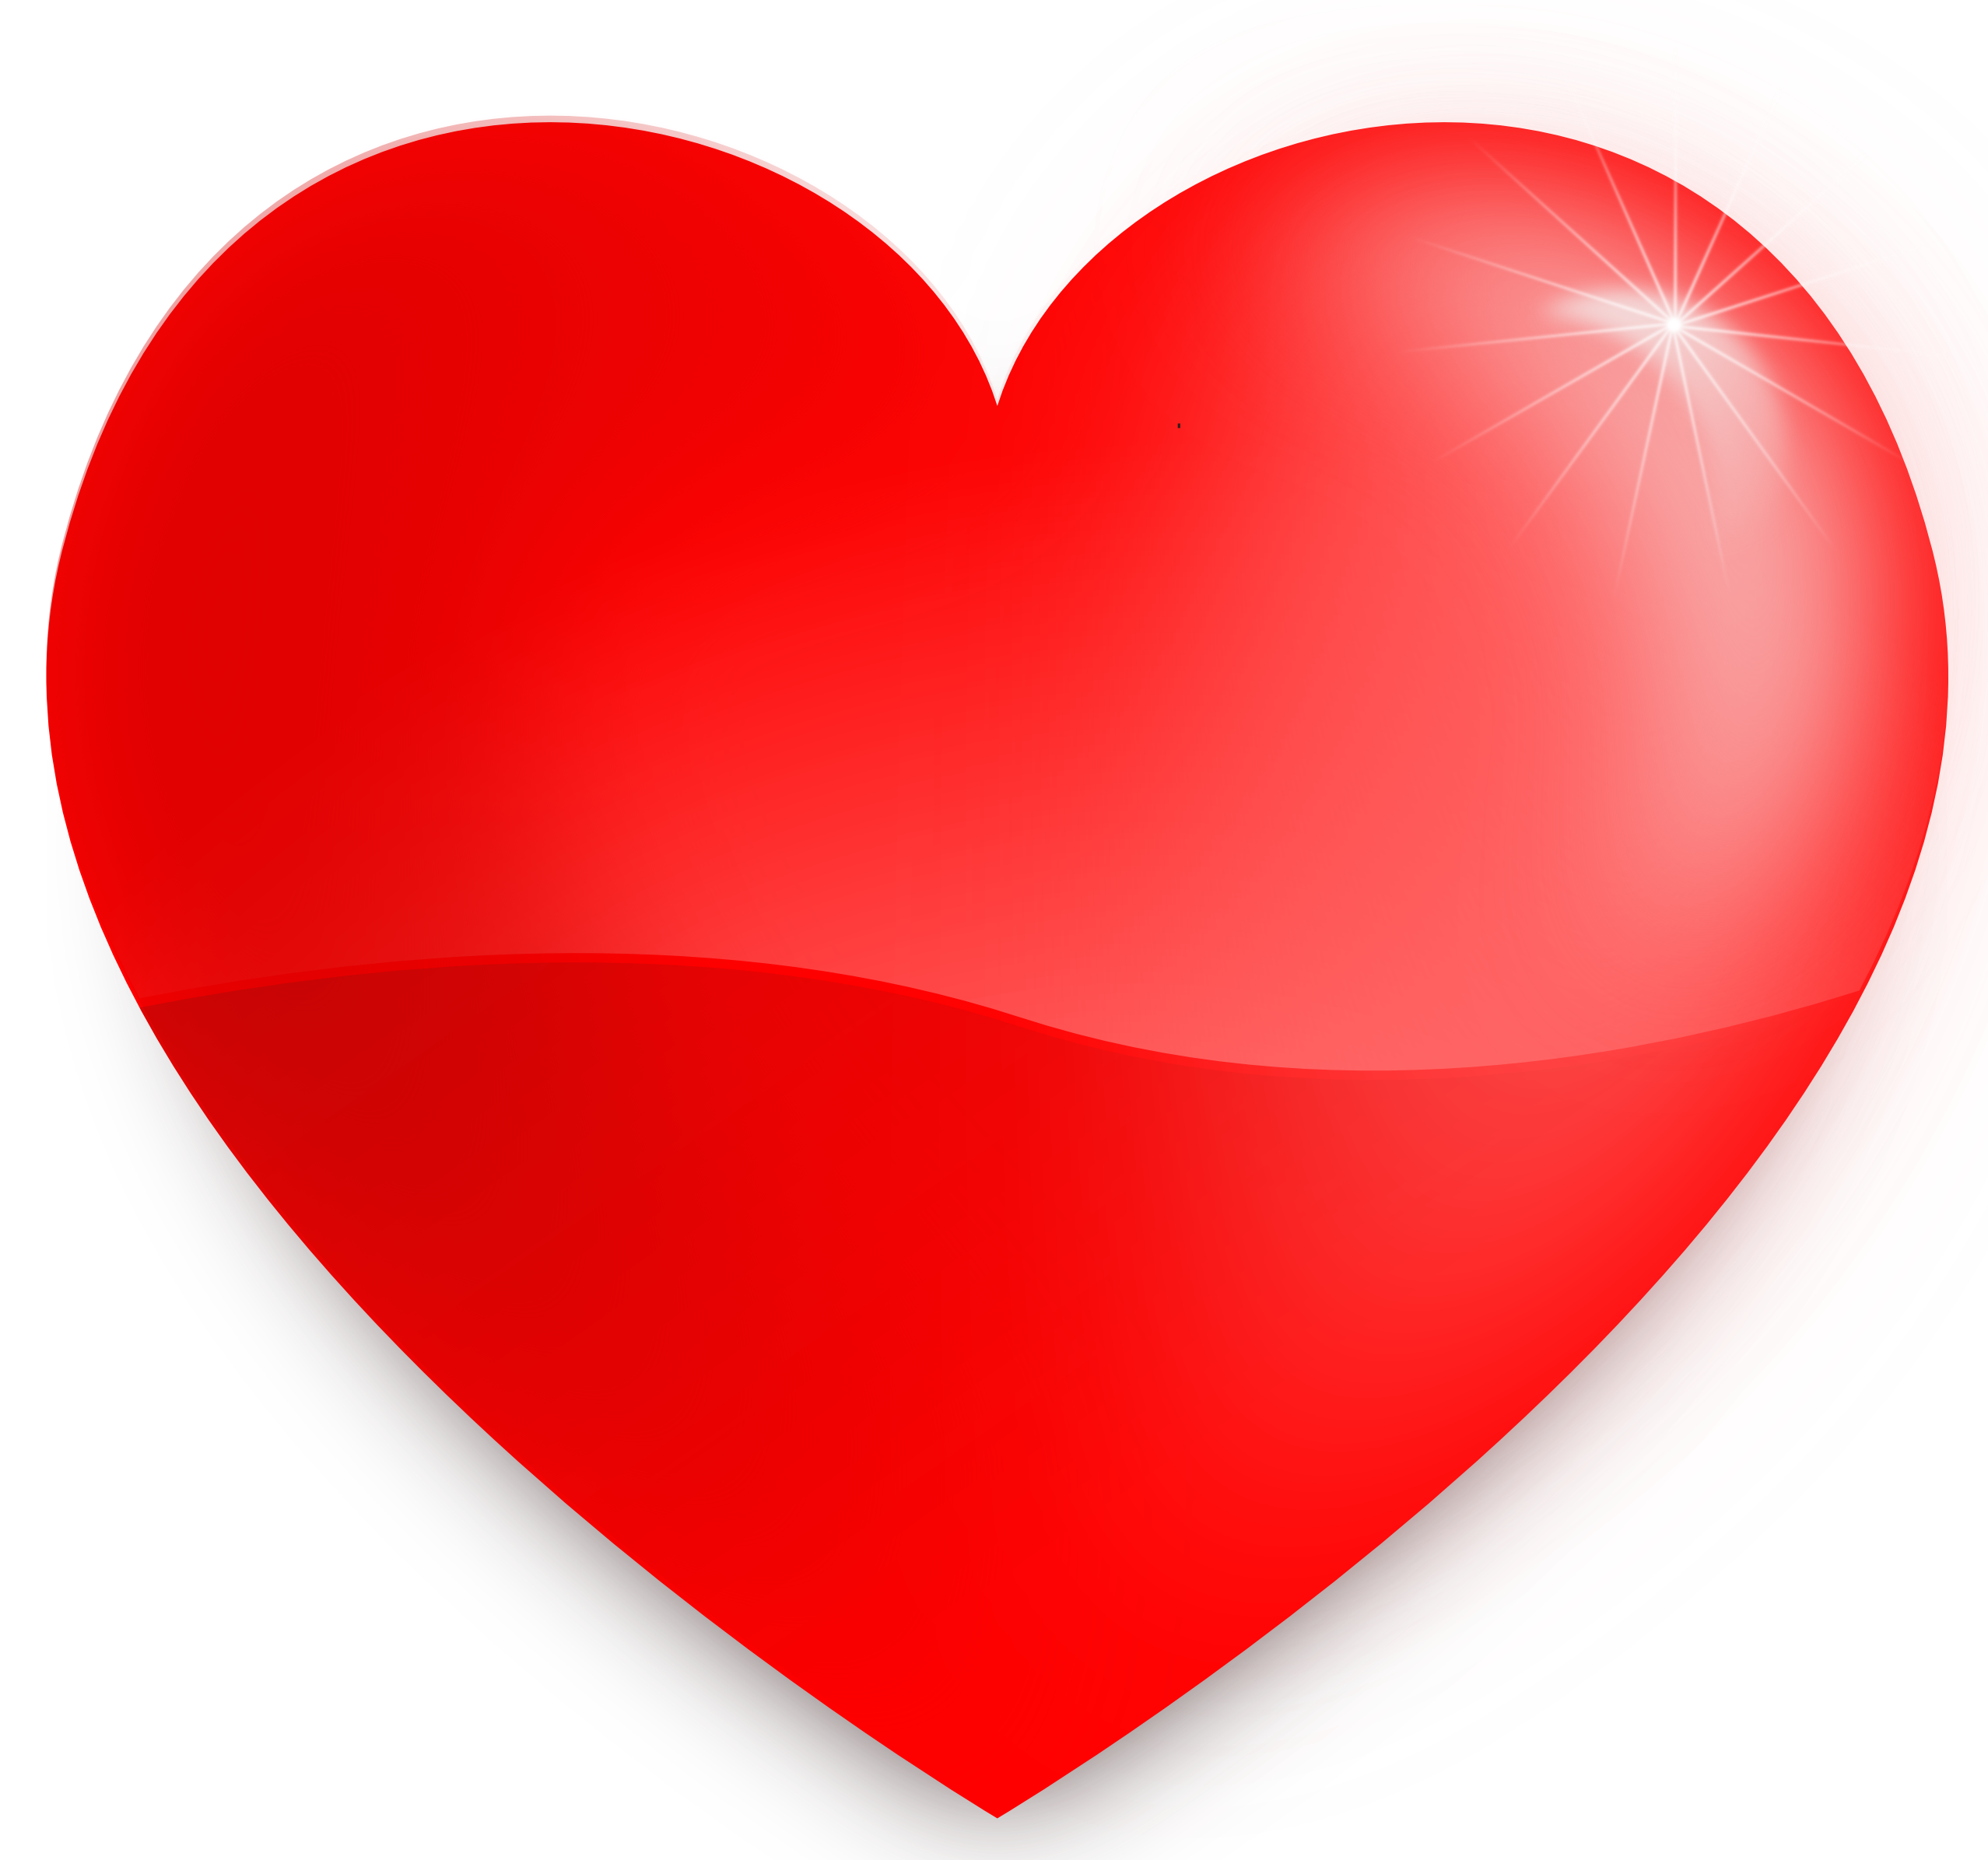 PNG File Name: Red Heart Plus